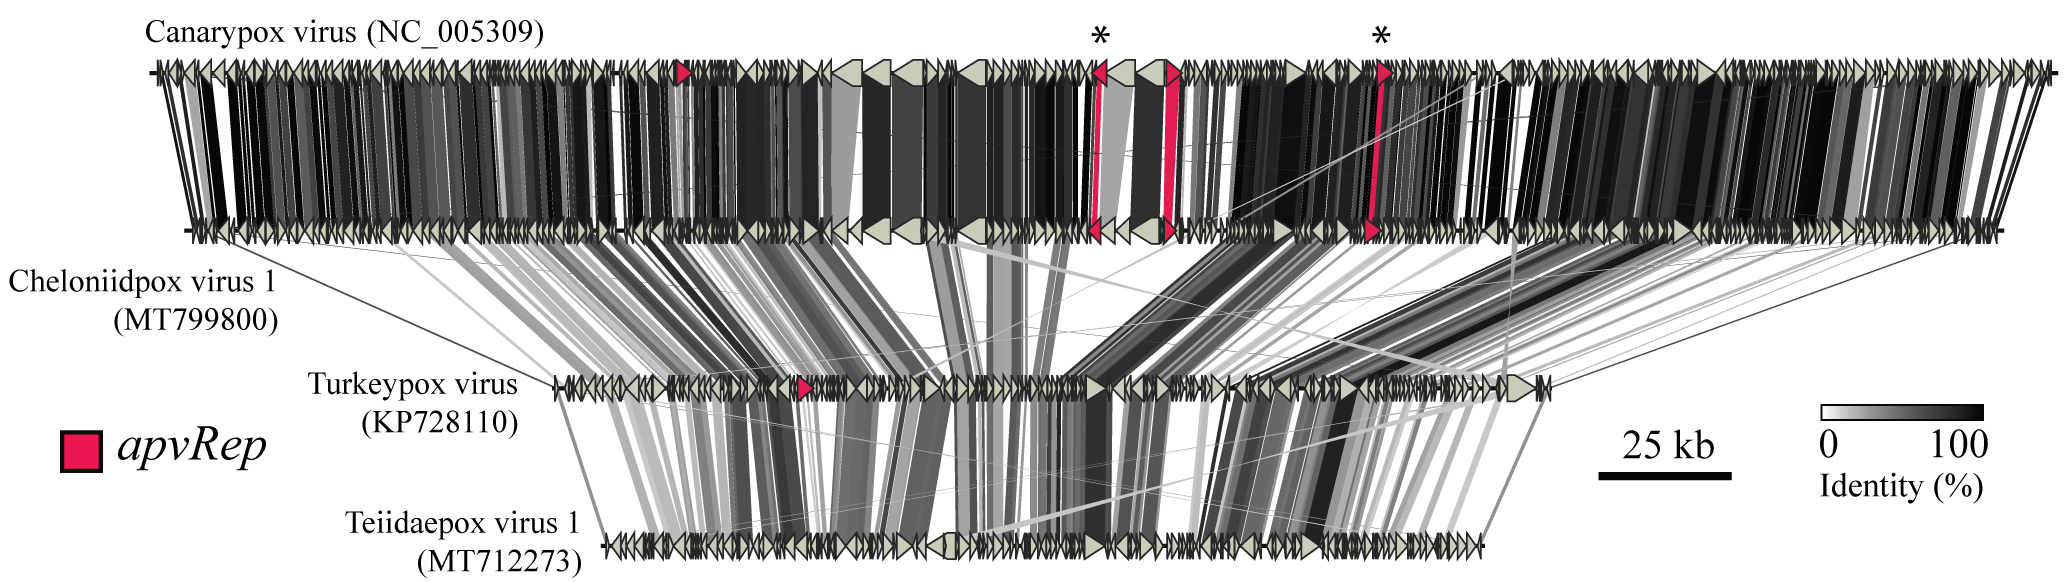 The image shows a genome synteny plot between four individual species of the genus Avipoxvirus